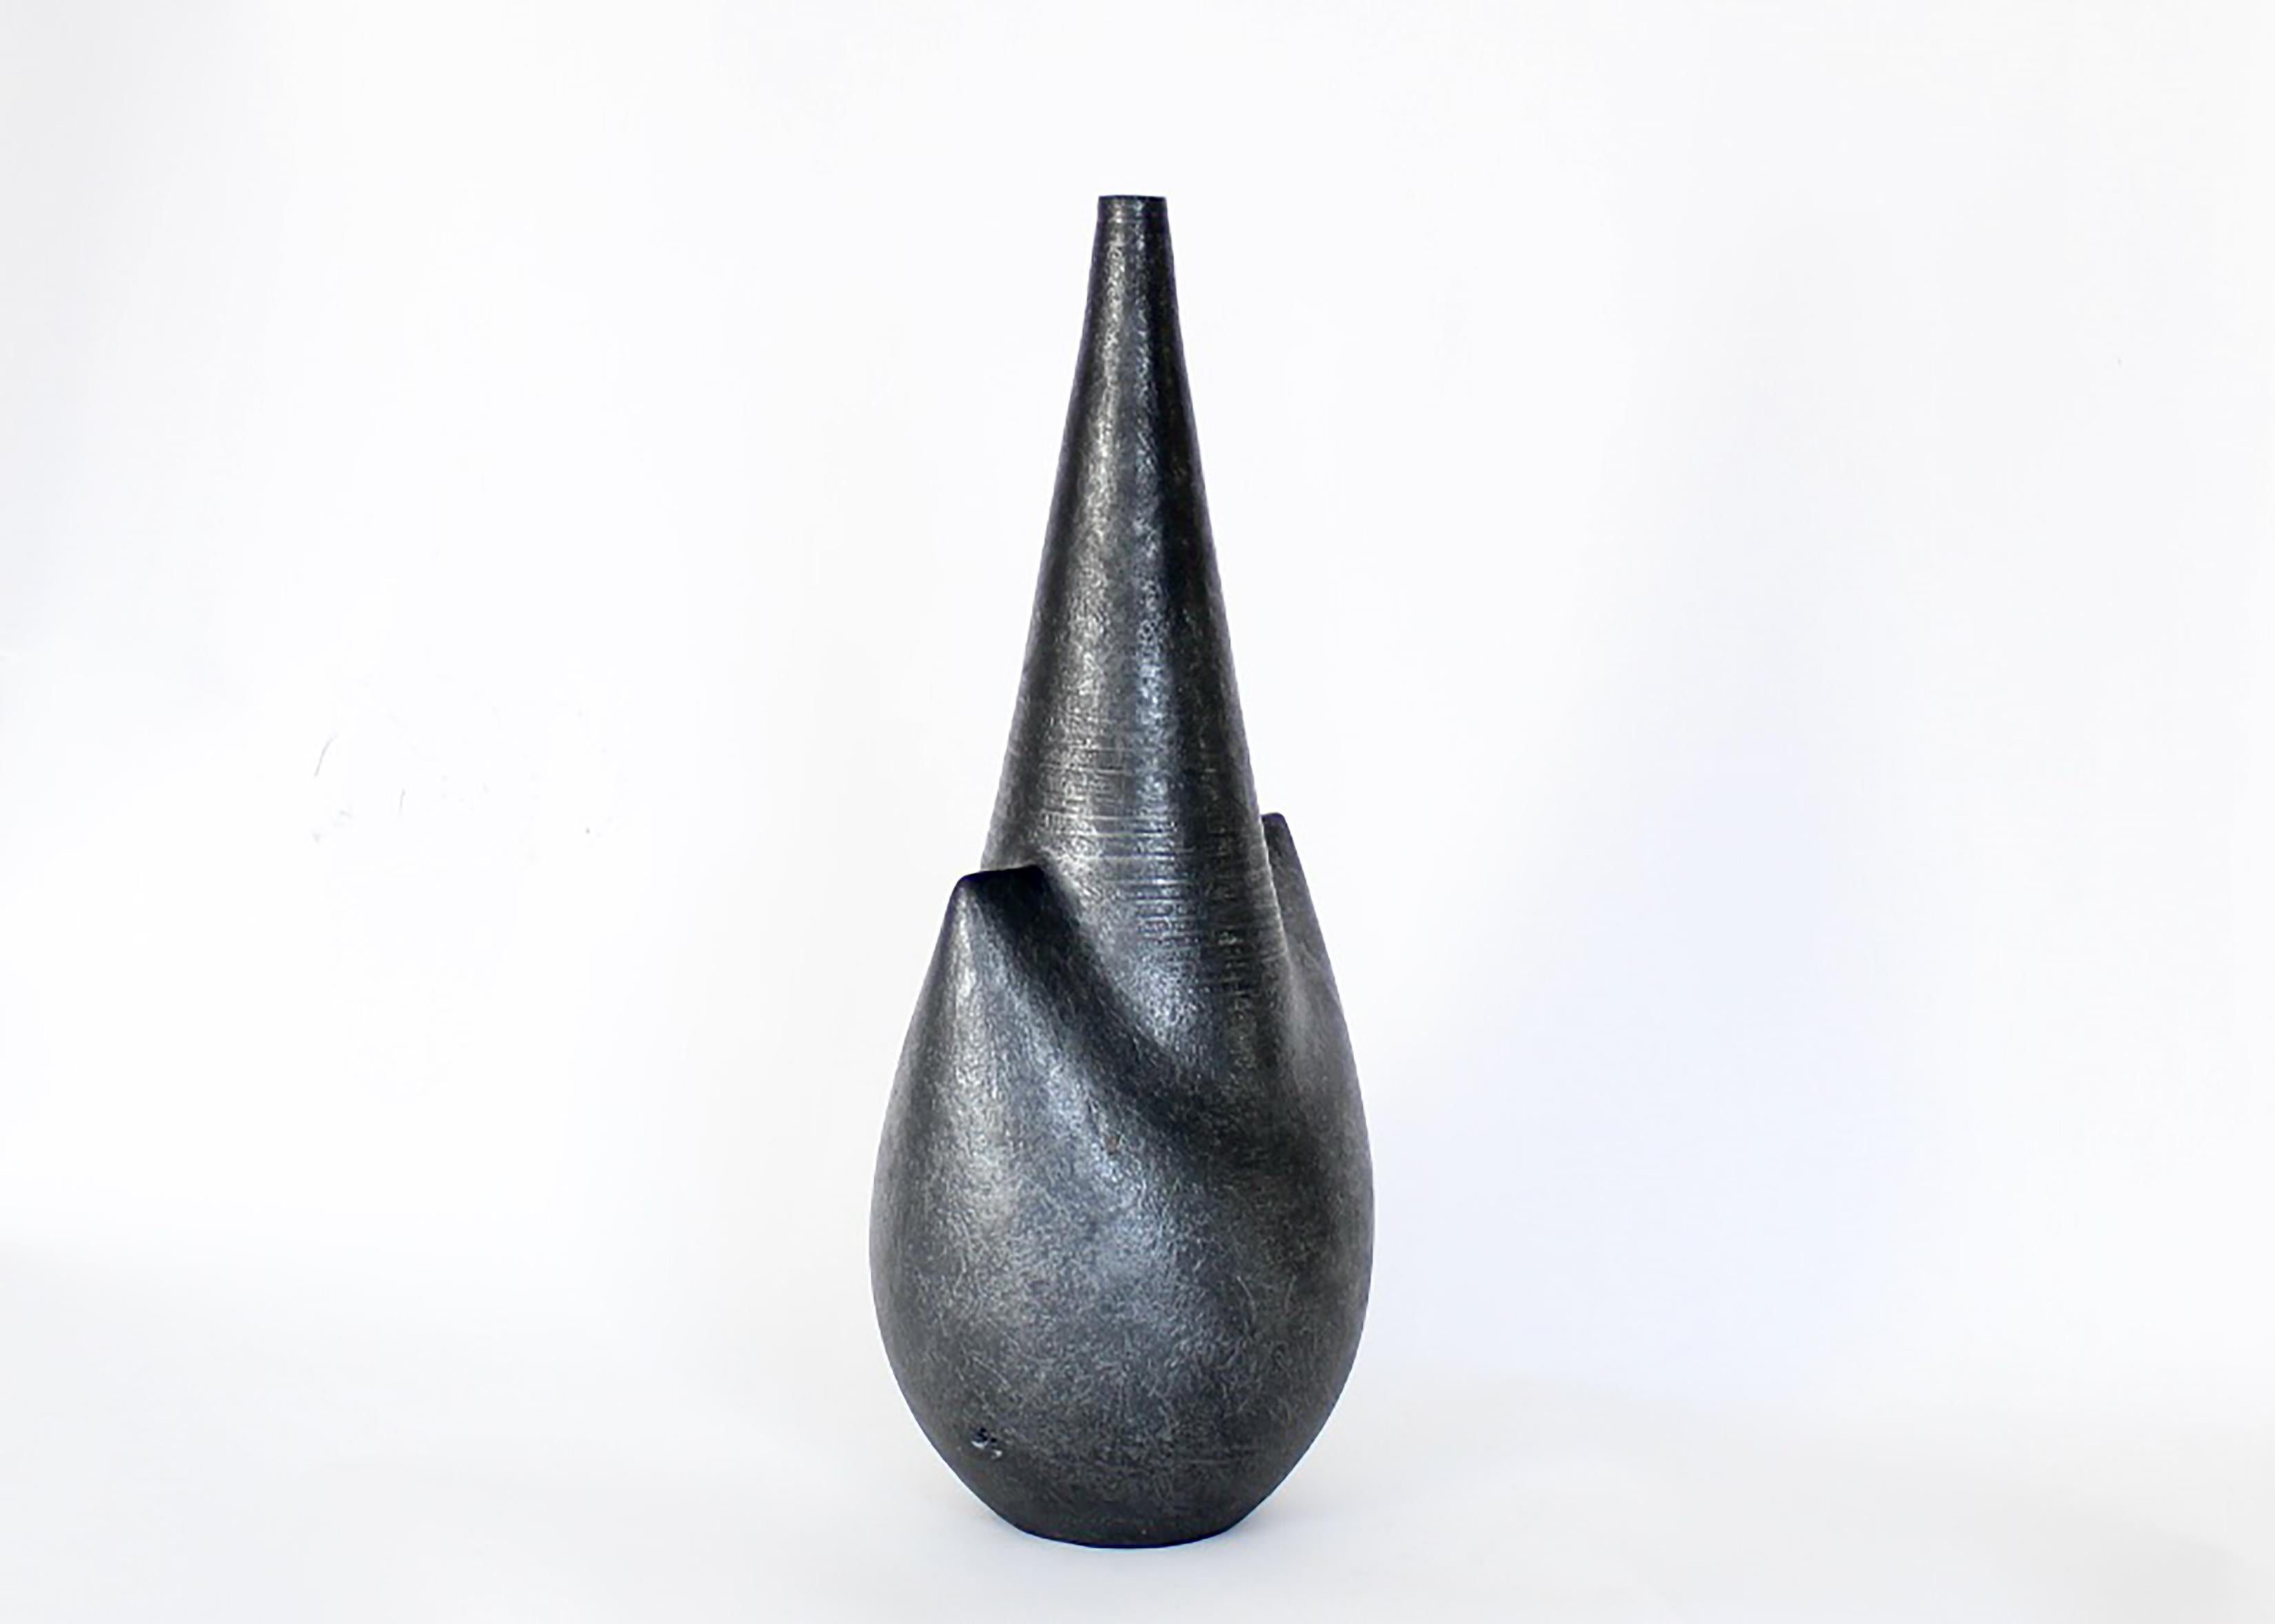 Contemporary Andre Bloch French Tall Ceramic Vase in Black Glaze c 2010 For Sale